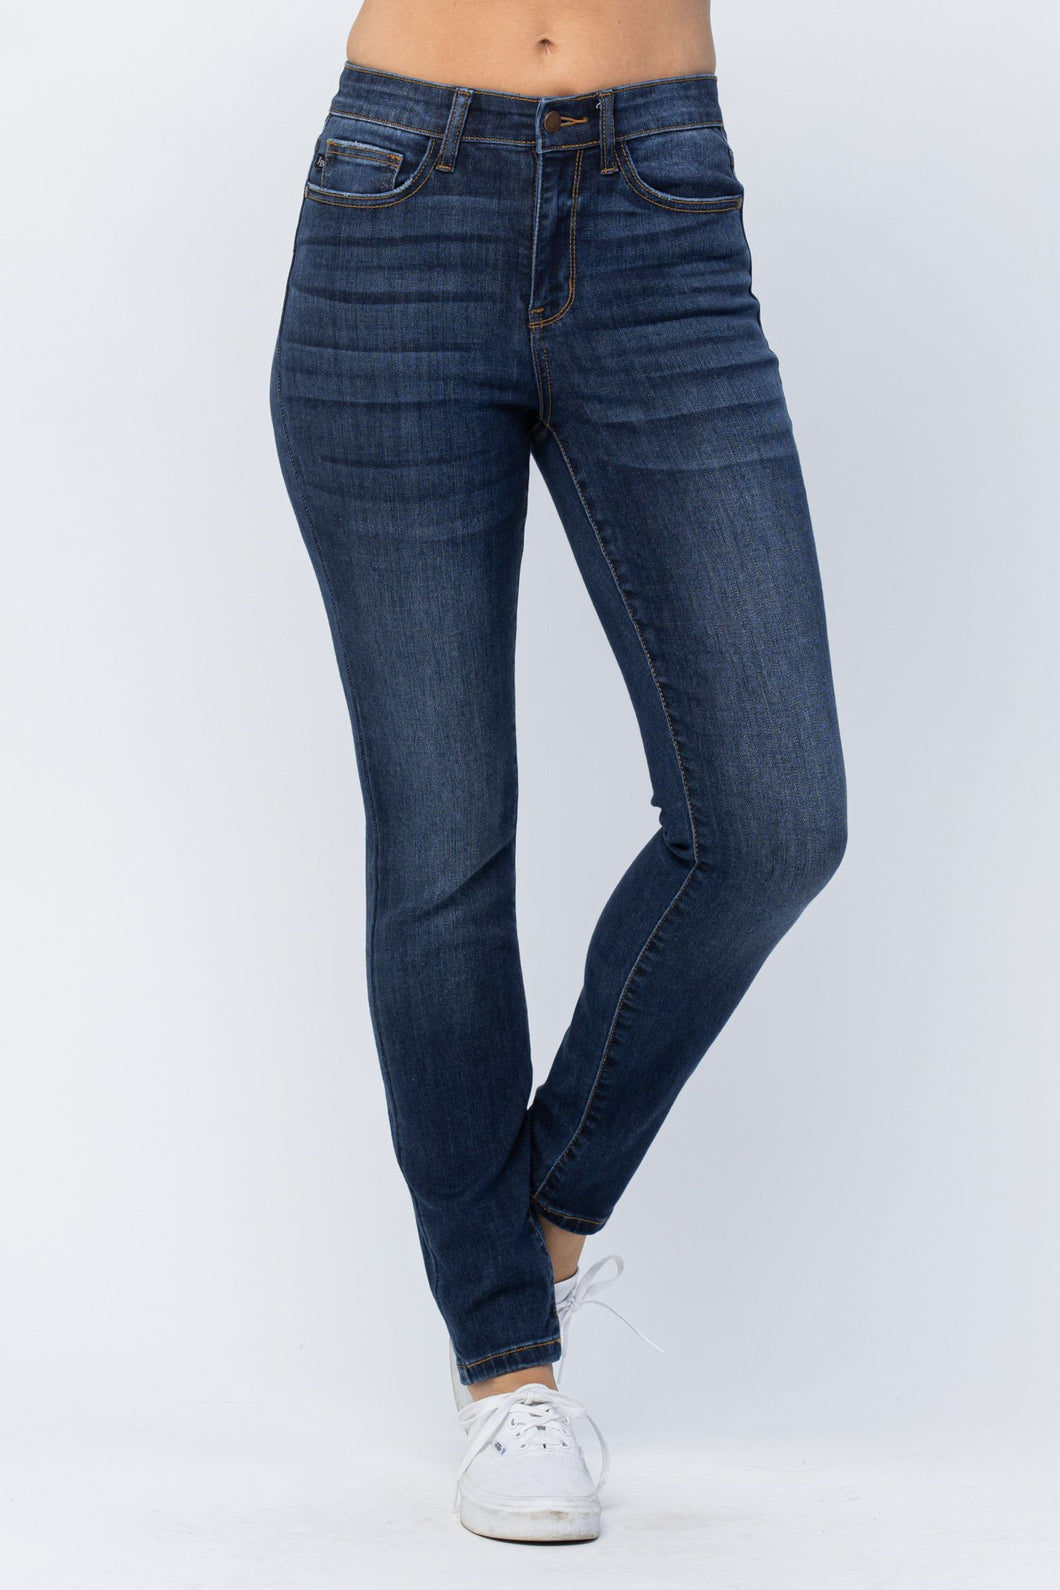 JUDY BLUE High Rise Clean Relaxed Fit Jeans